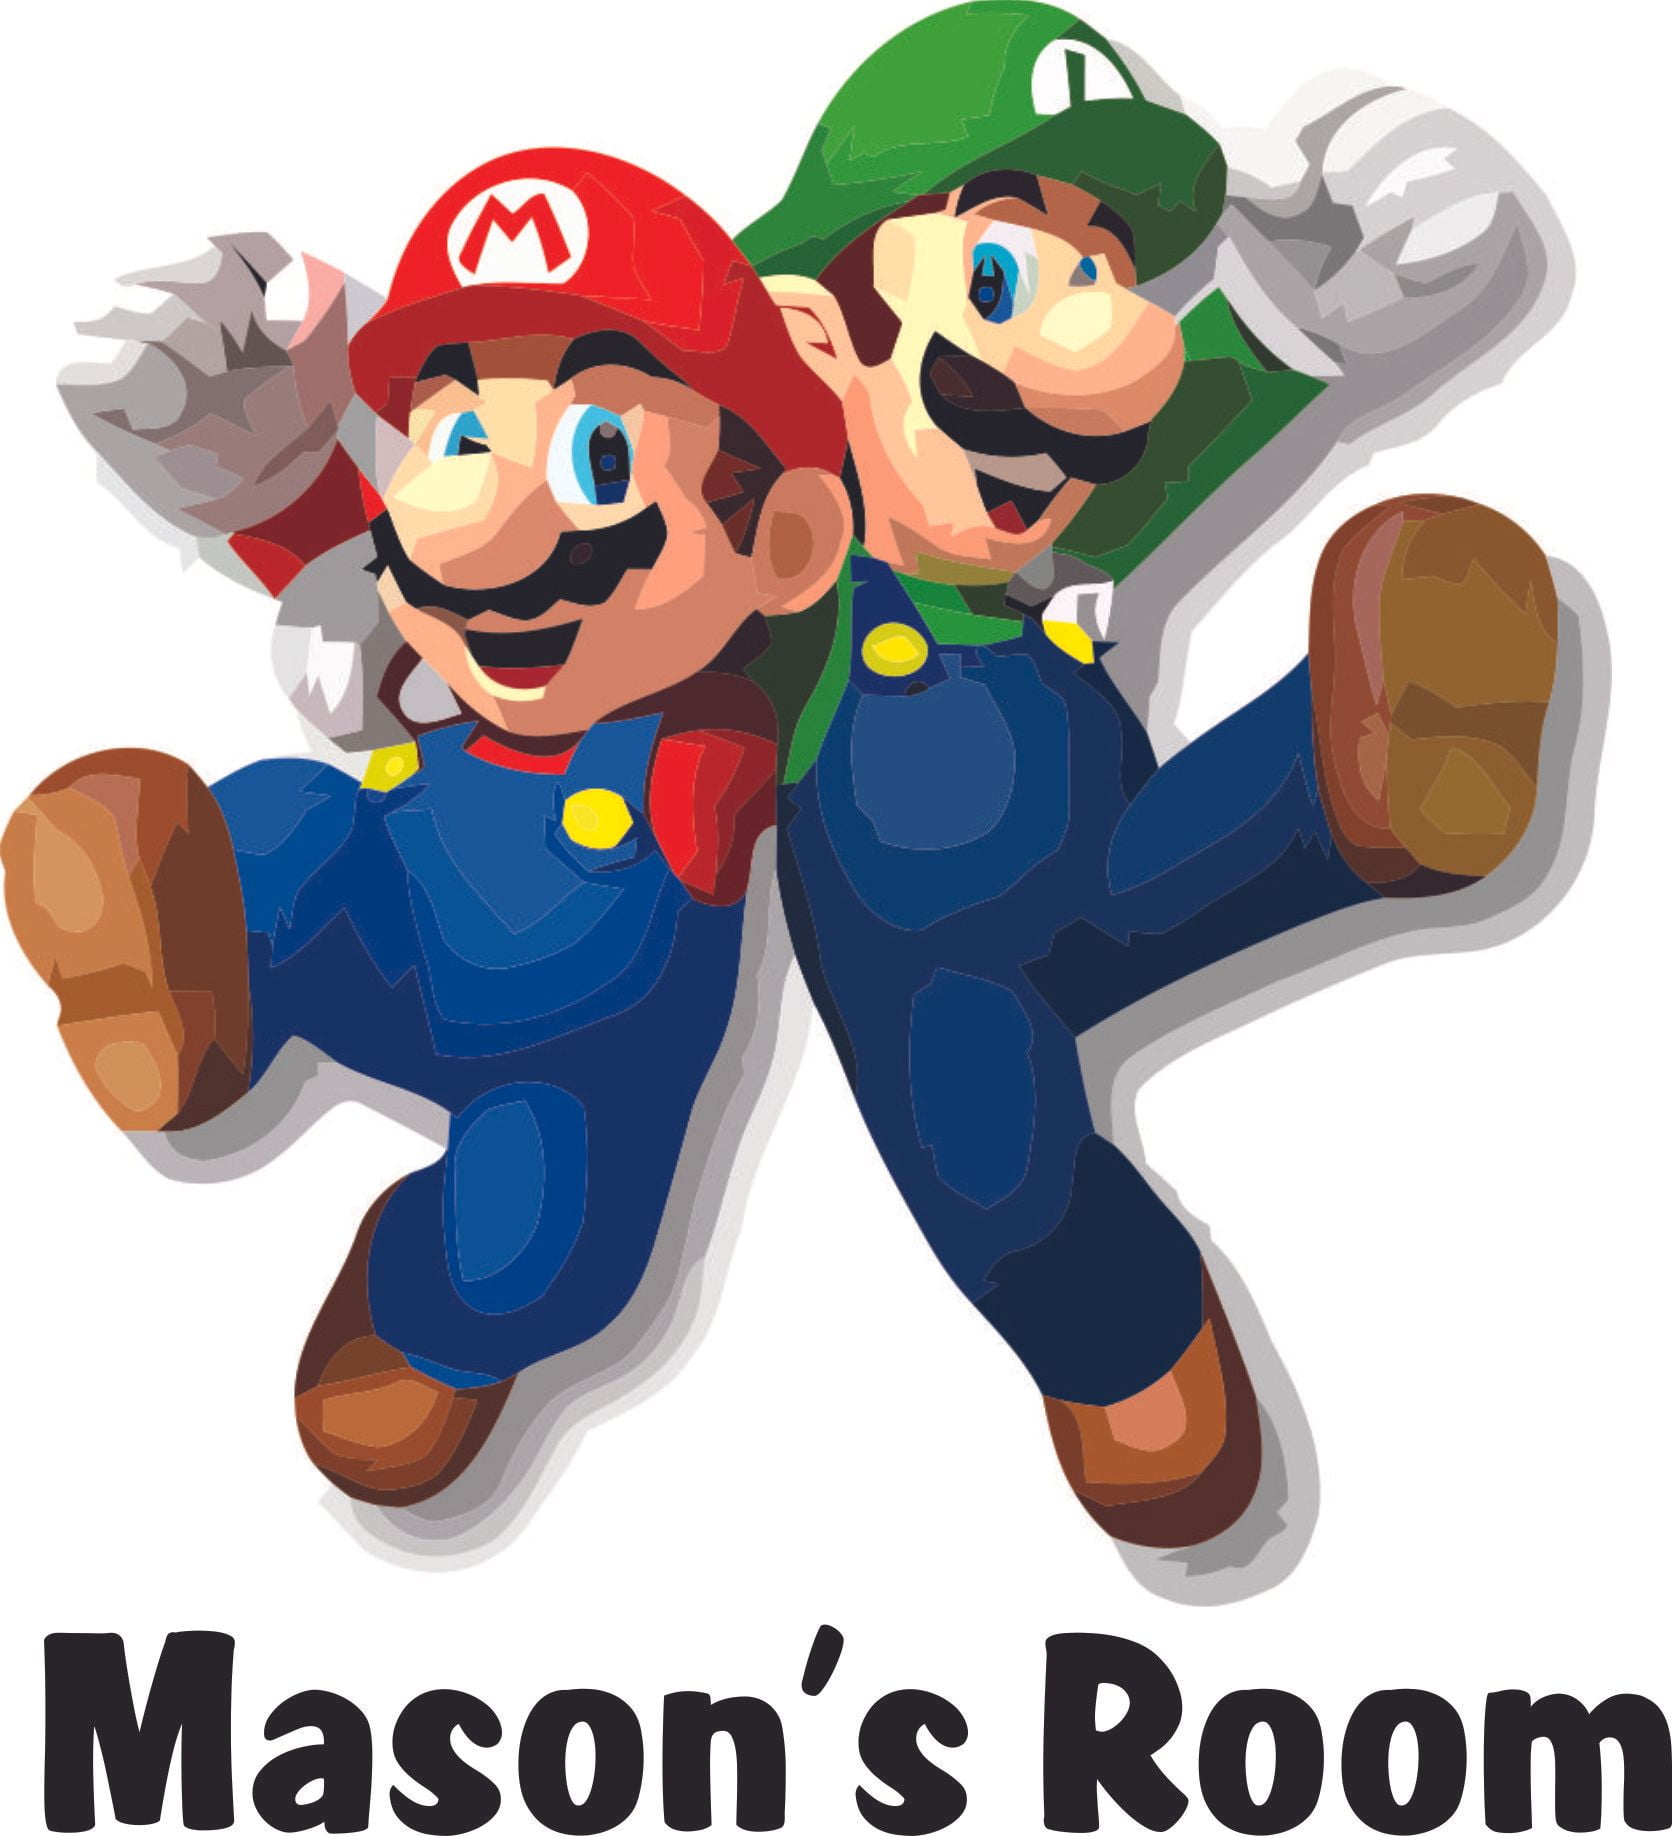 Personalised Any Name Super Mario Wall Decal 3D Art Sticker Vinyl Room Bedroom 1 